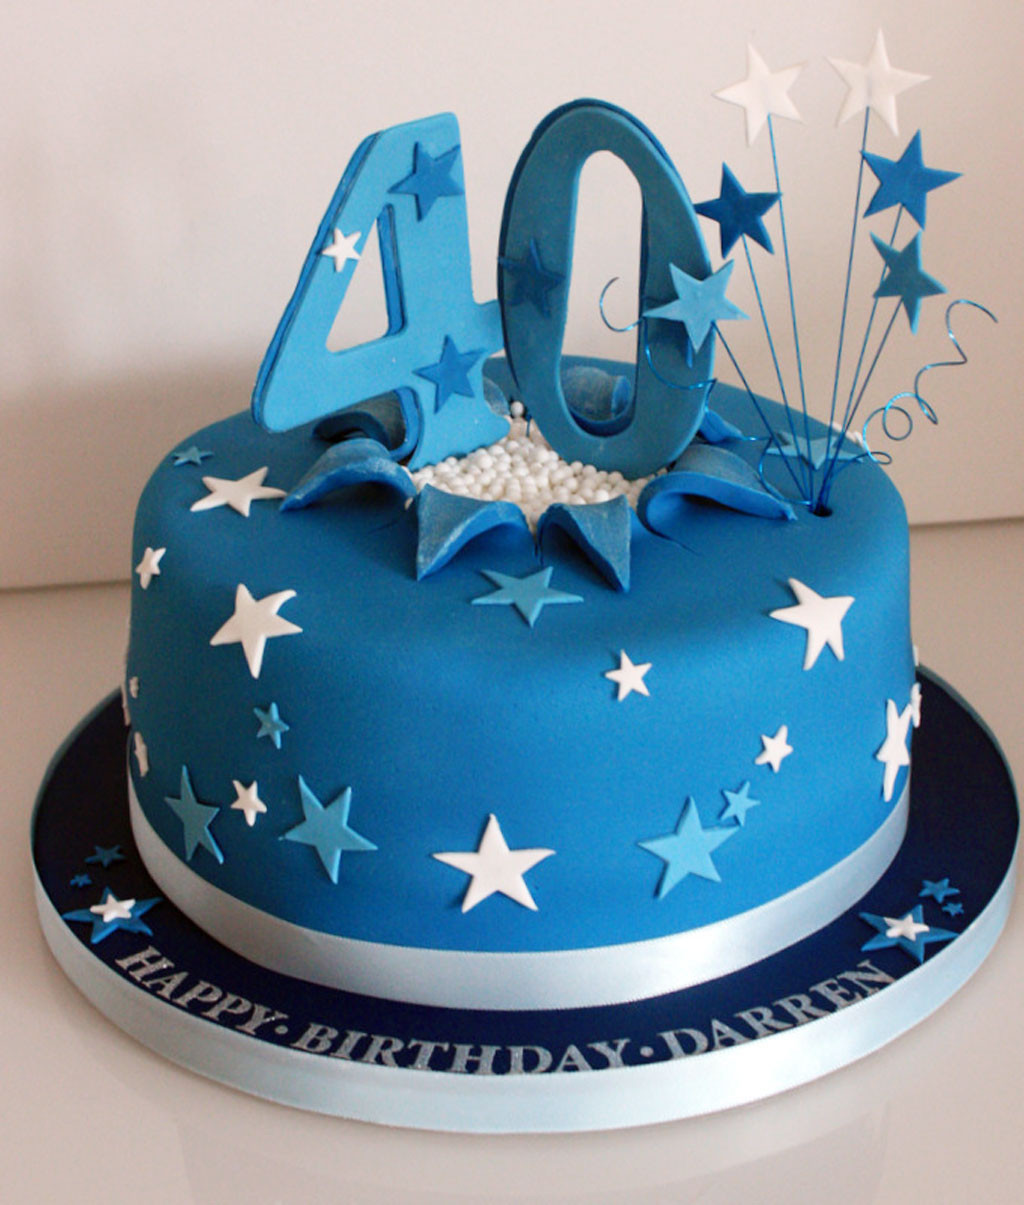 Best ideas about 40th Birthday Cake
. Save or Pin 40th Birthday Cake Ideas Funny Birthday Cake Cake Ideas Now.